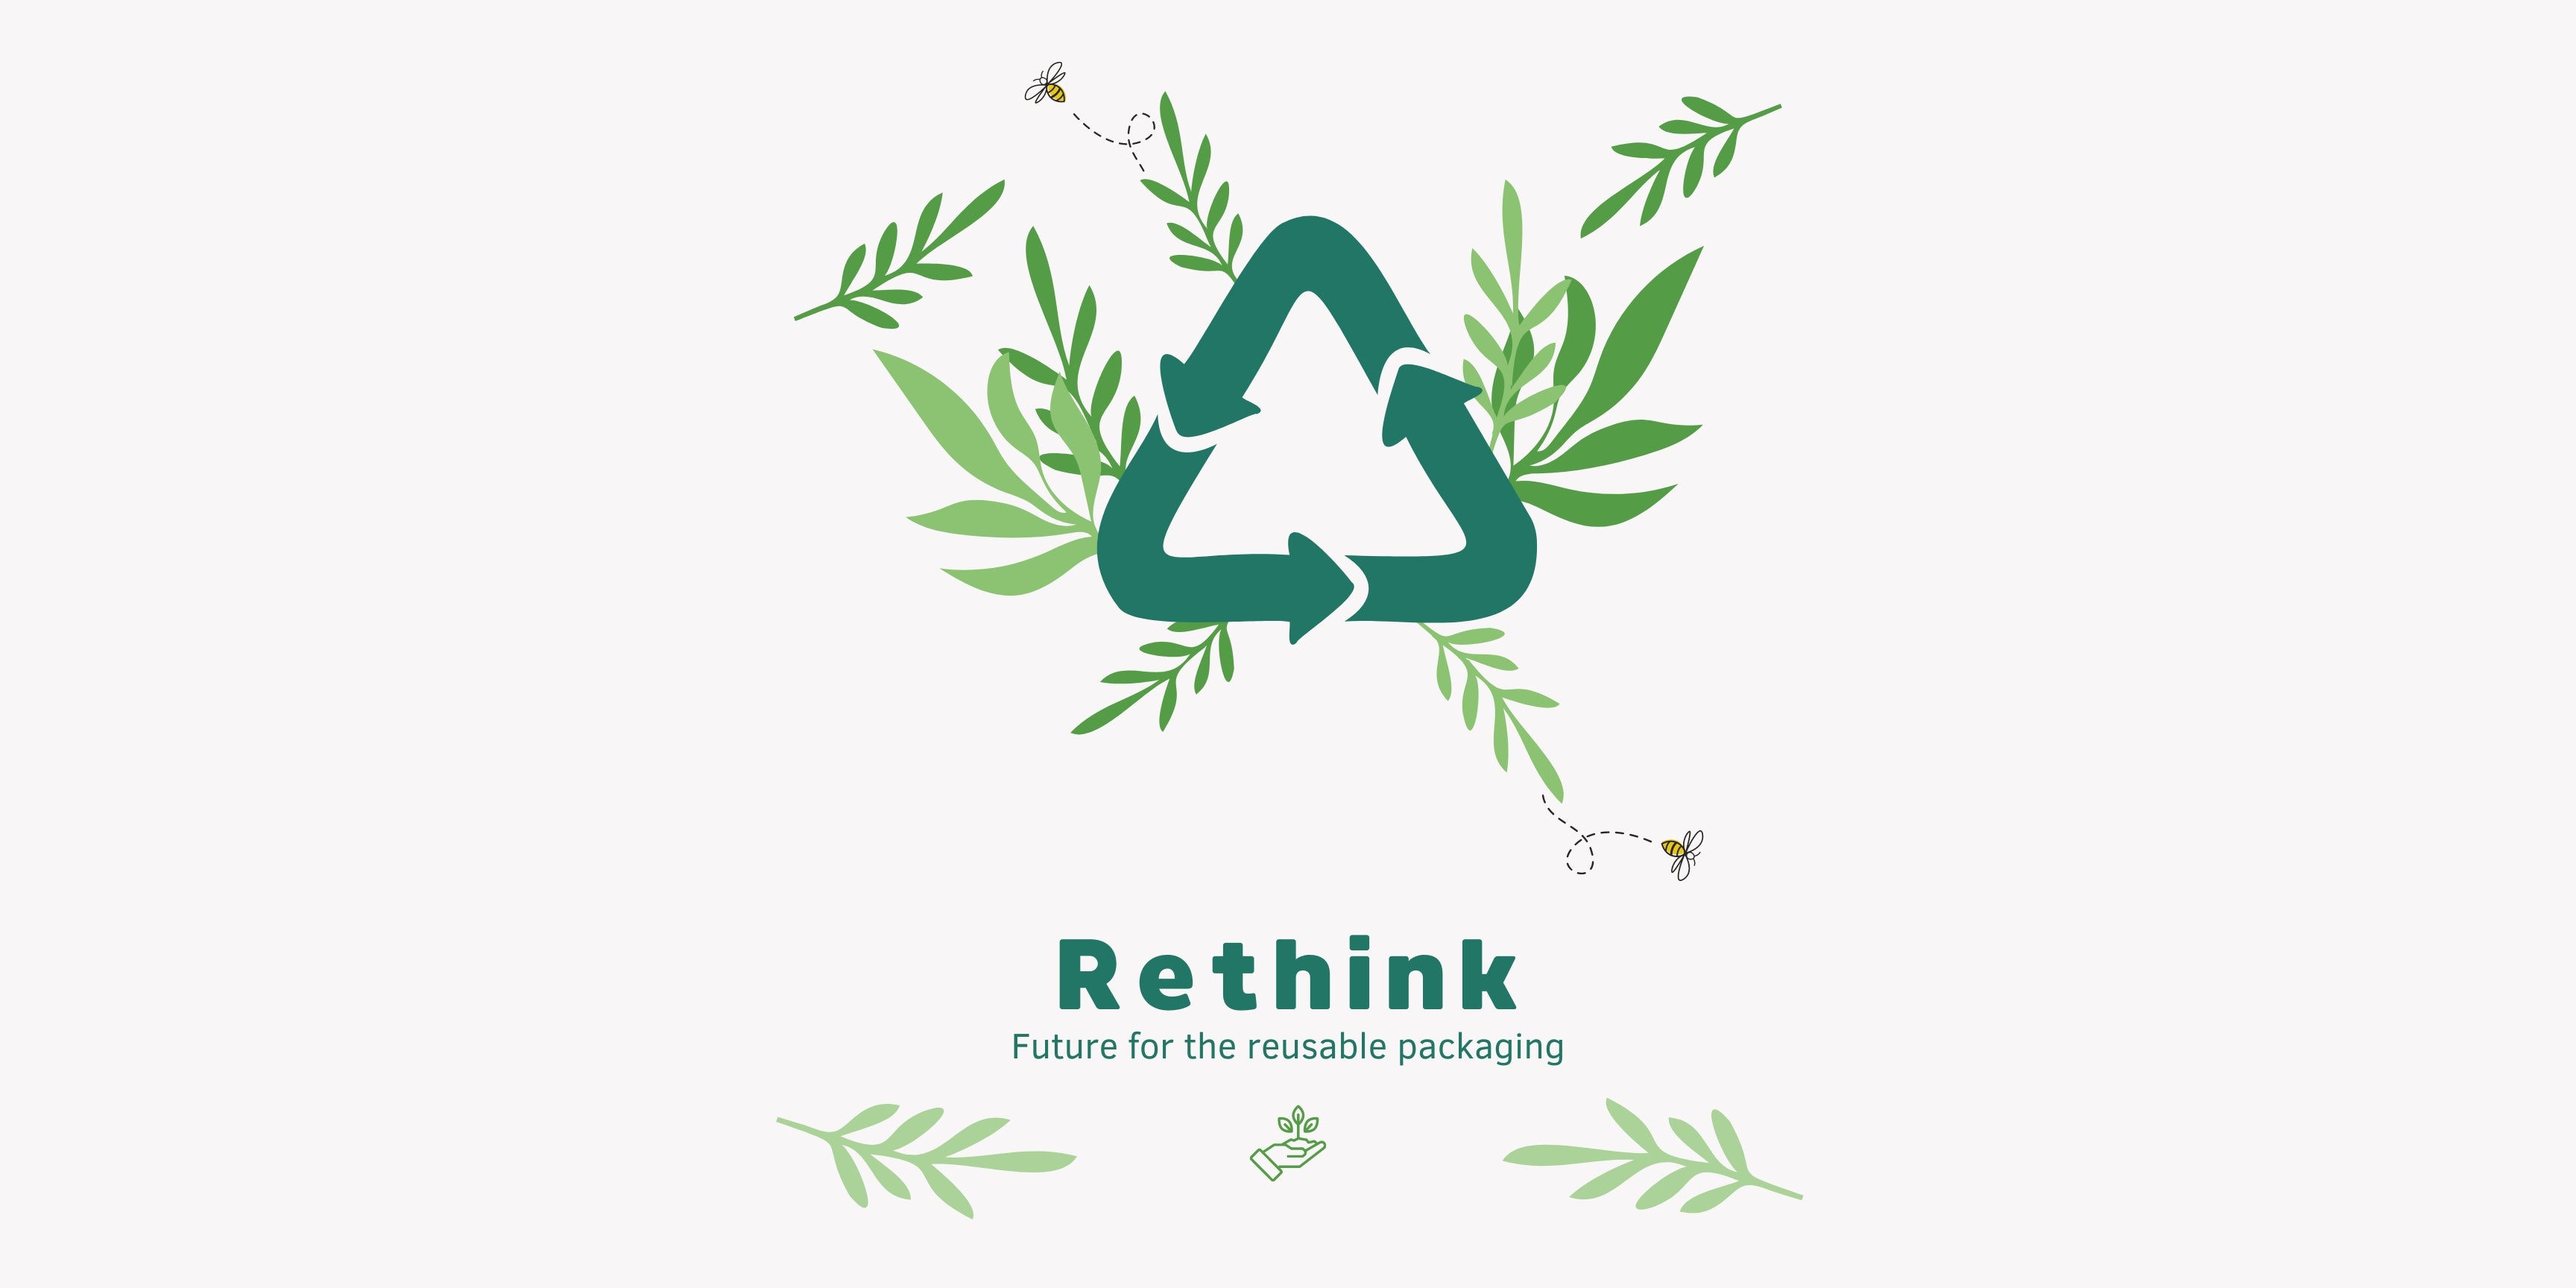 Rethink the future of reusable packaging